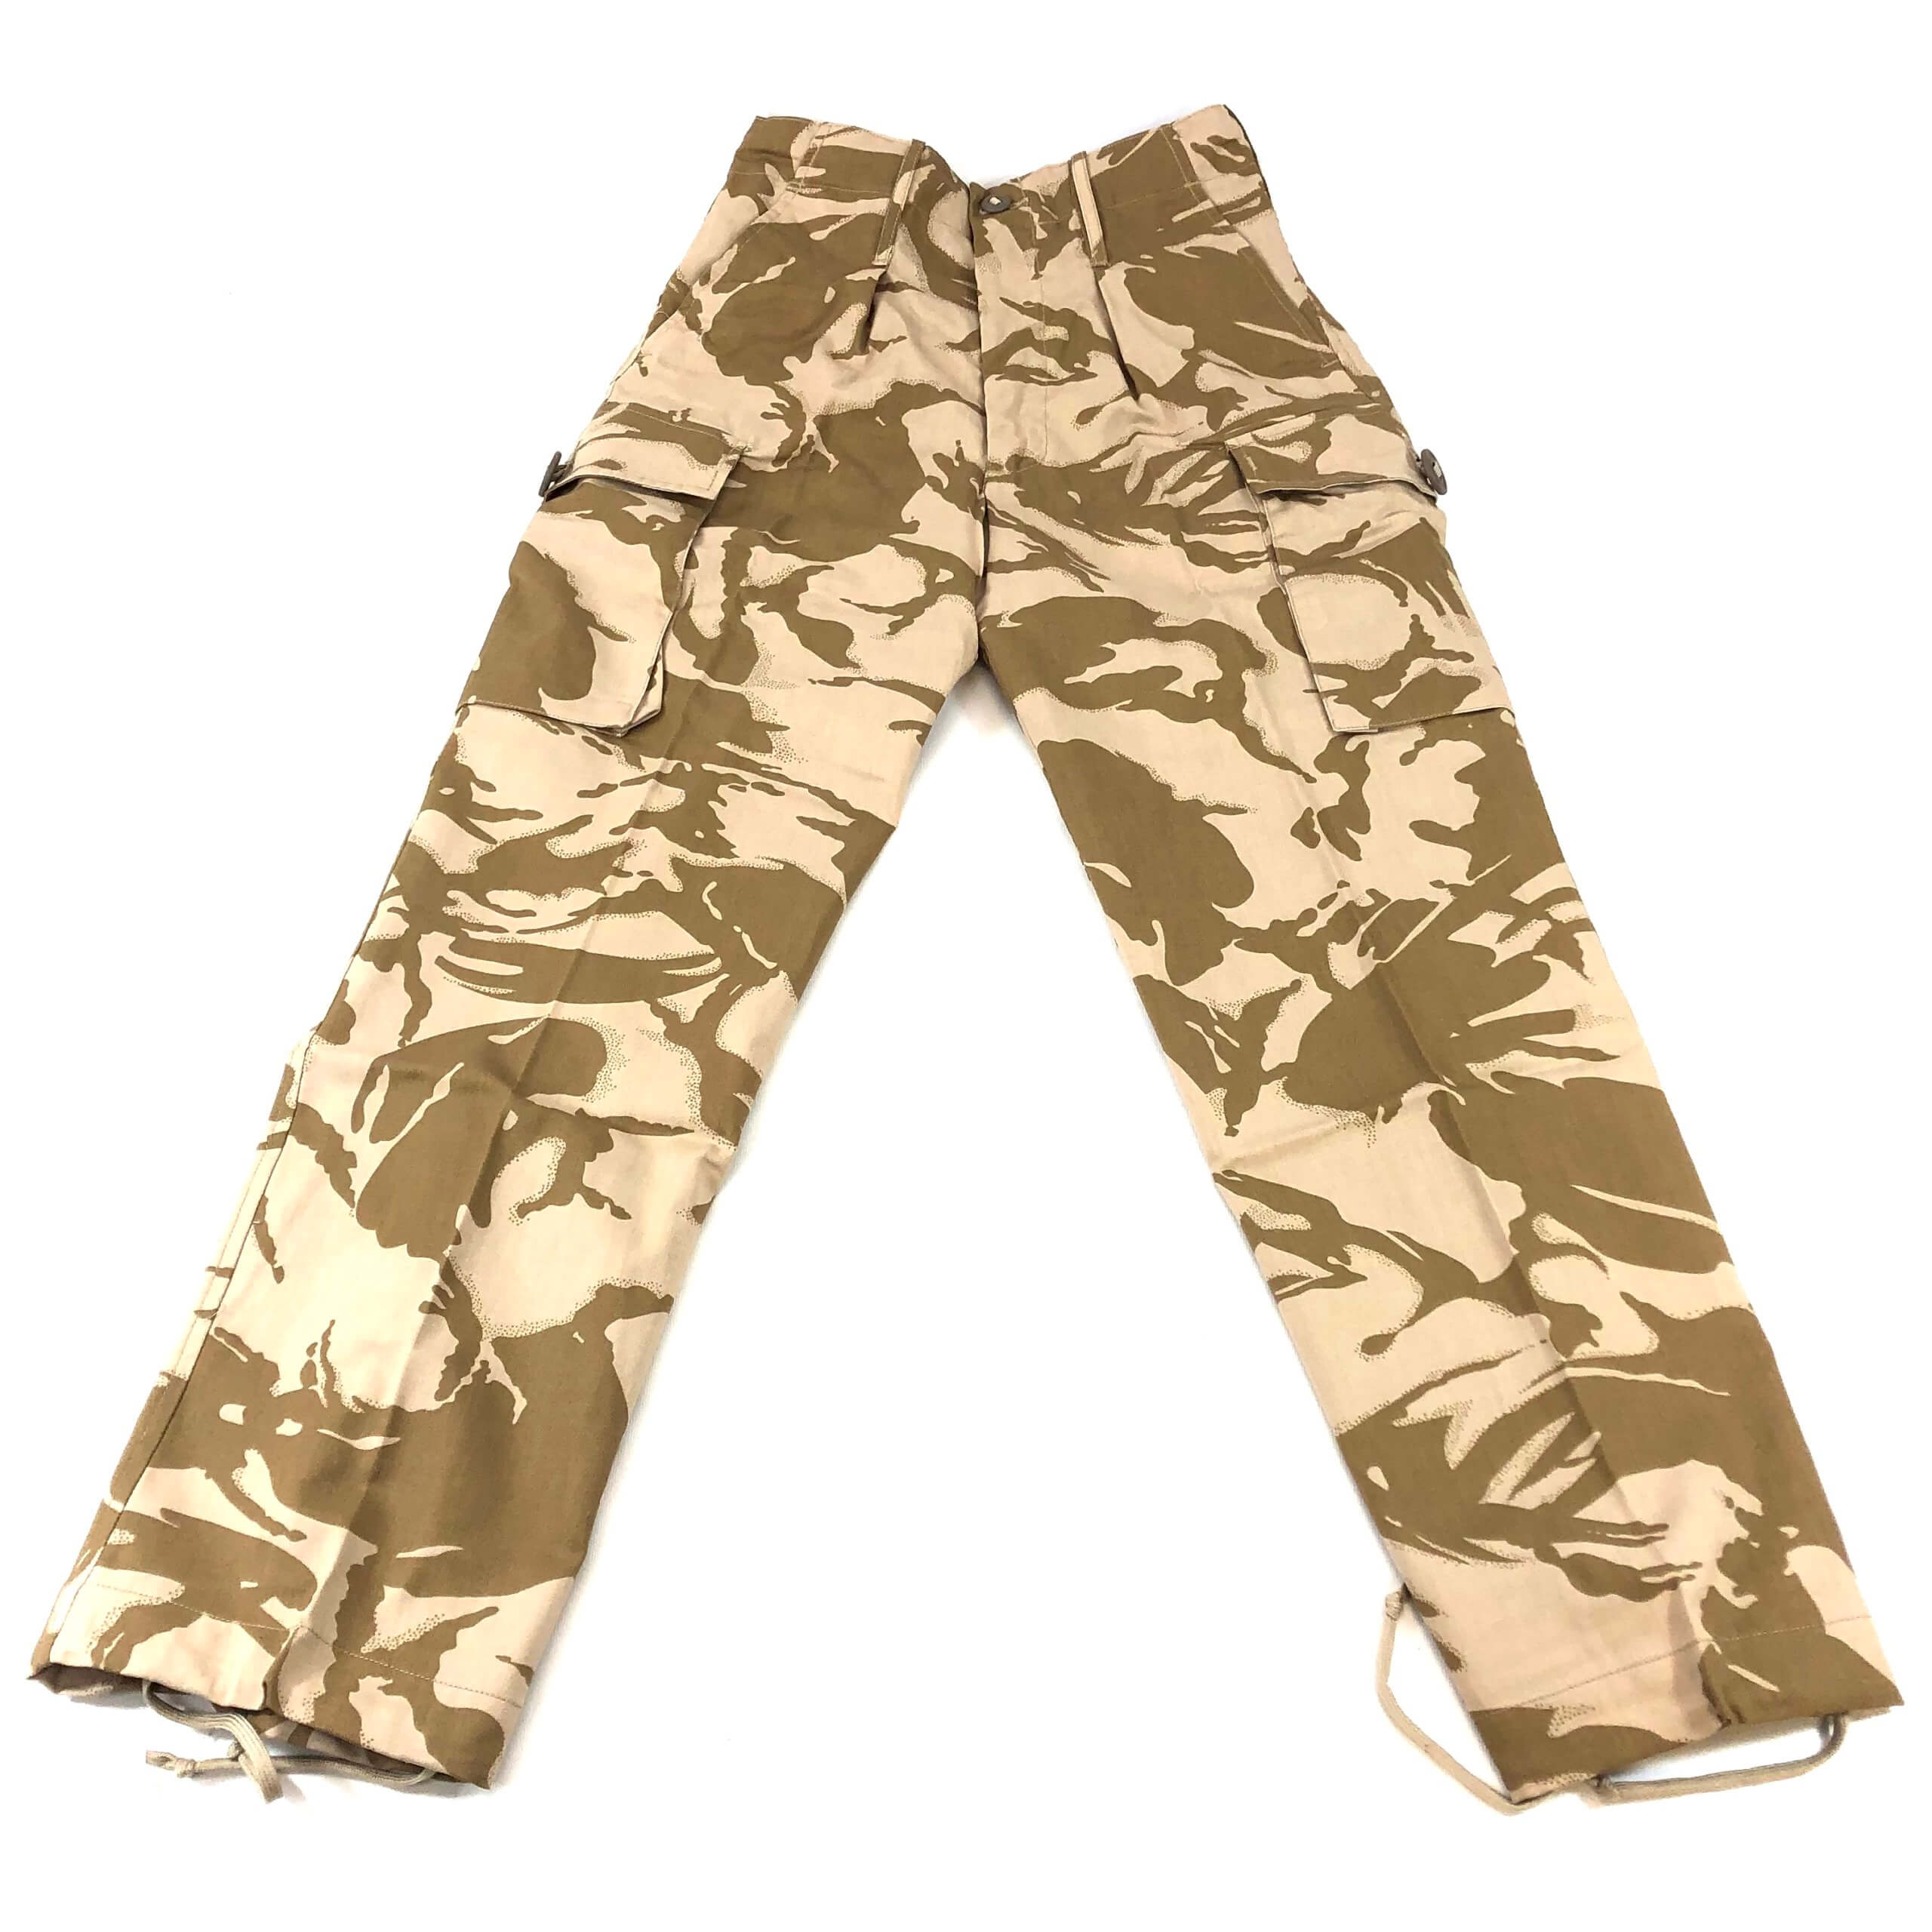 British DPM Camouflage BDU Trousers All Sizes Military Army Pants Camo New